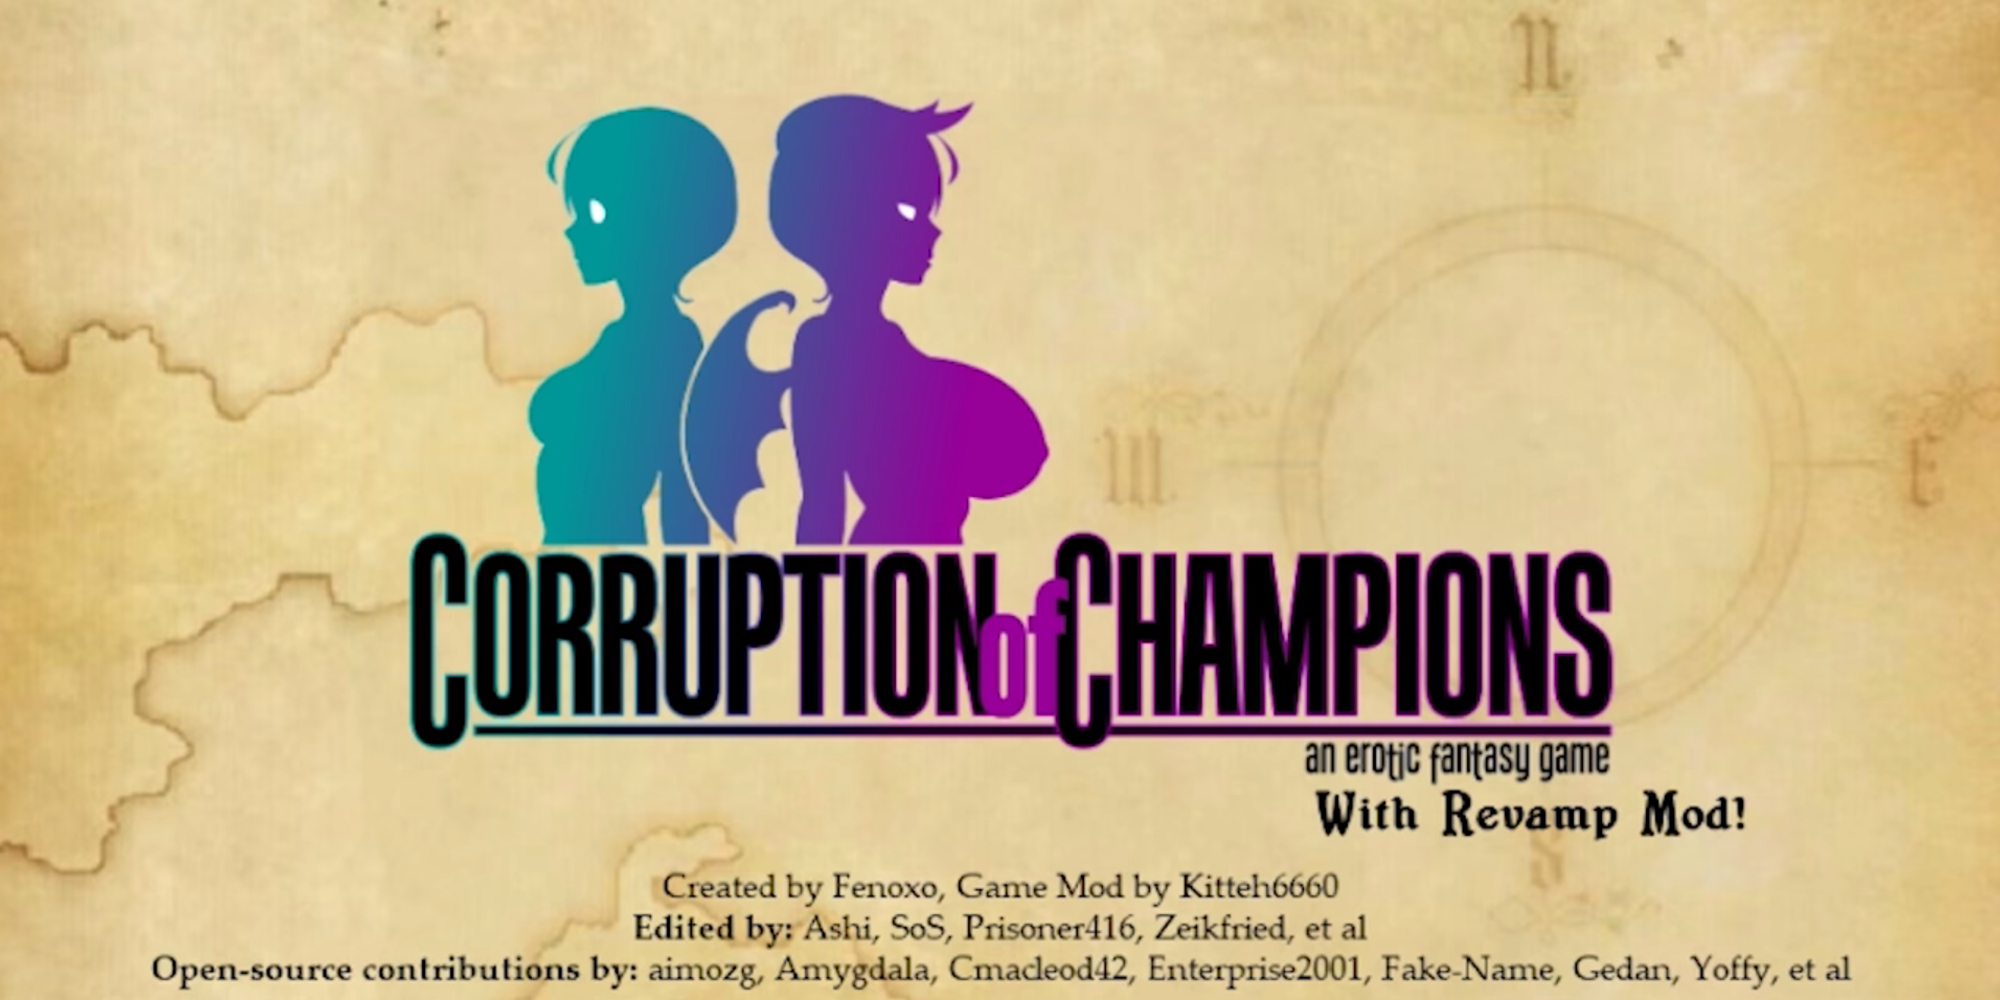 corruption of champions revamp mod with pictures